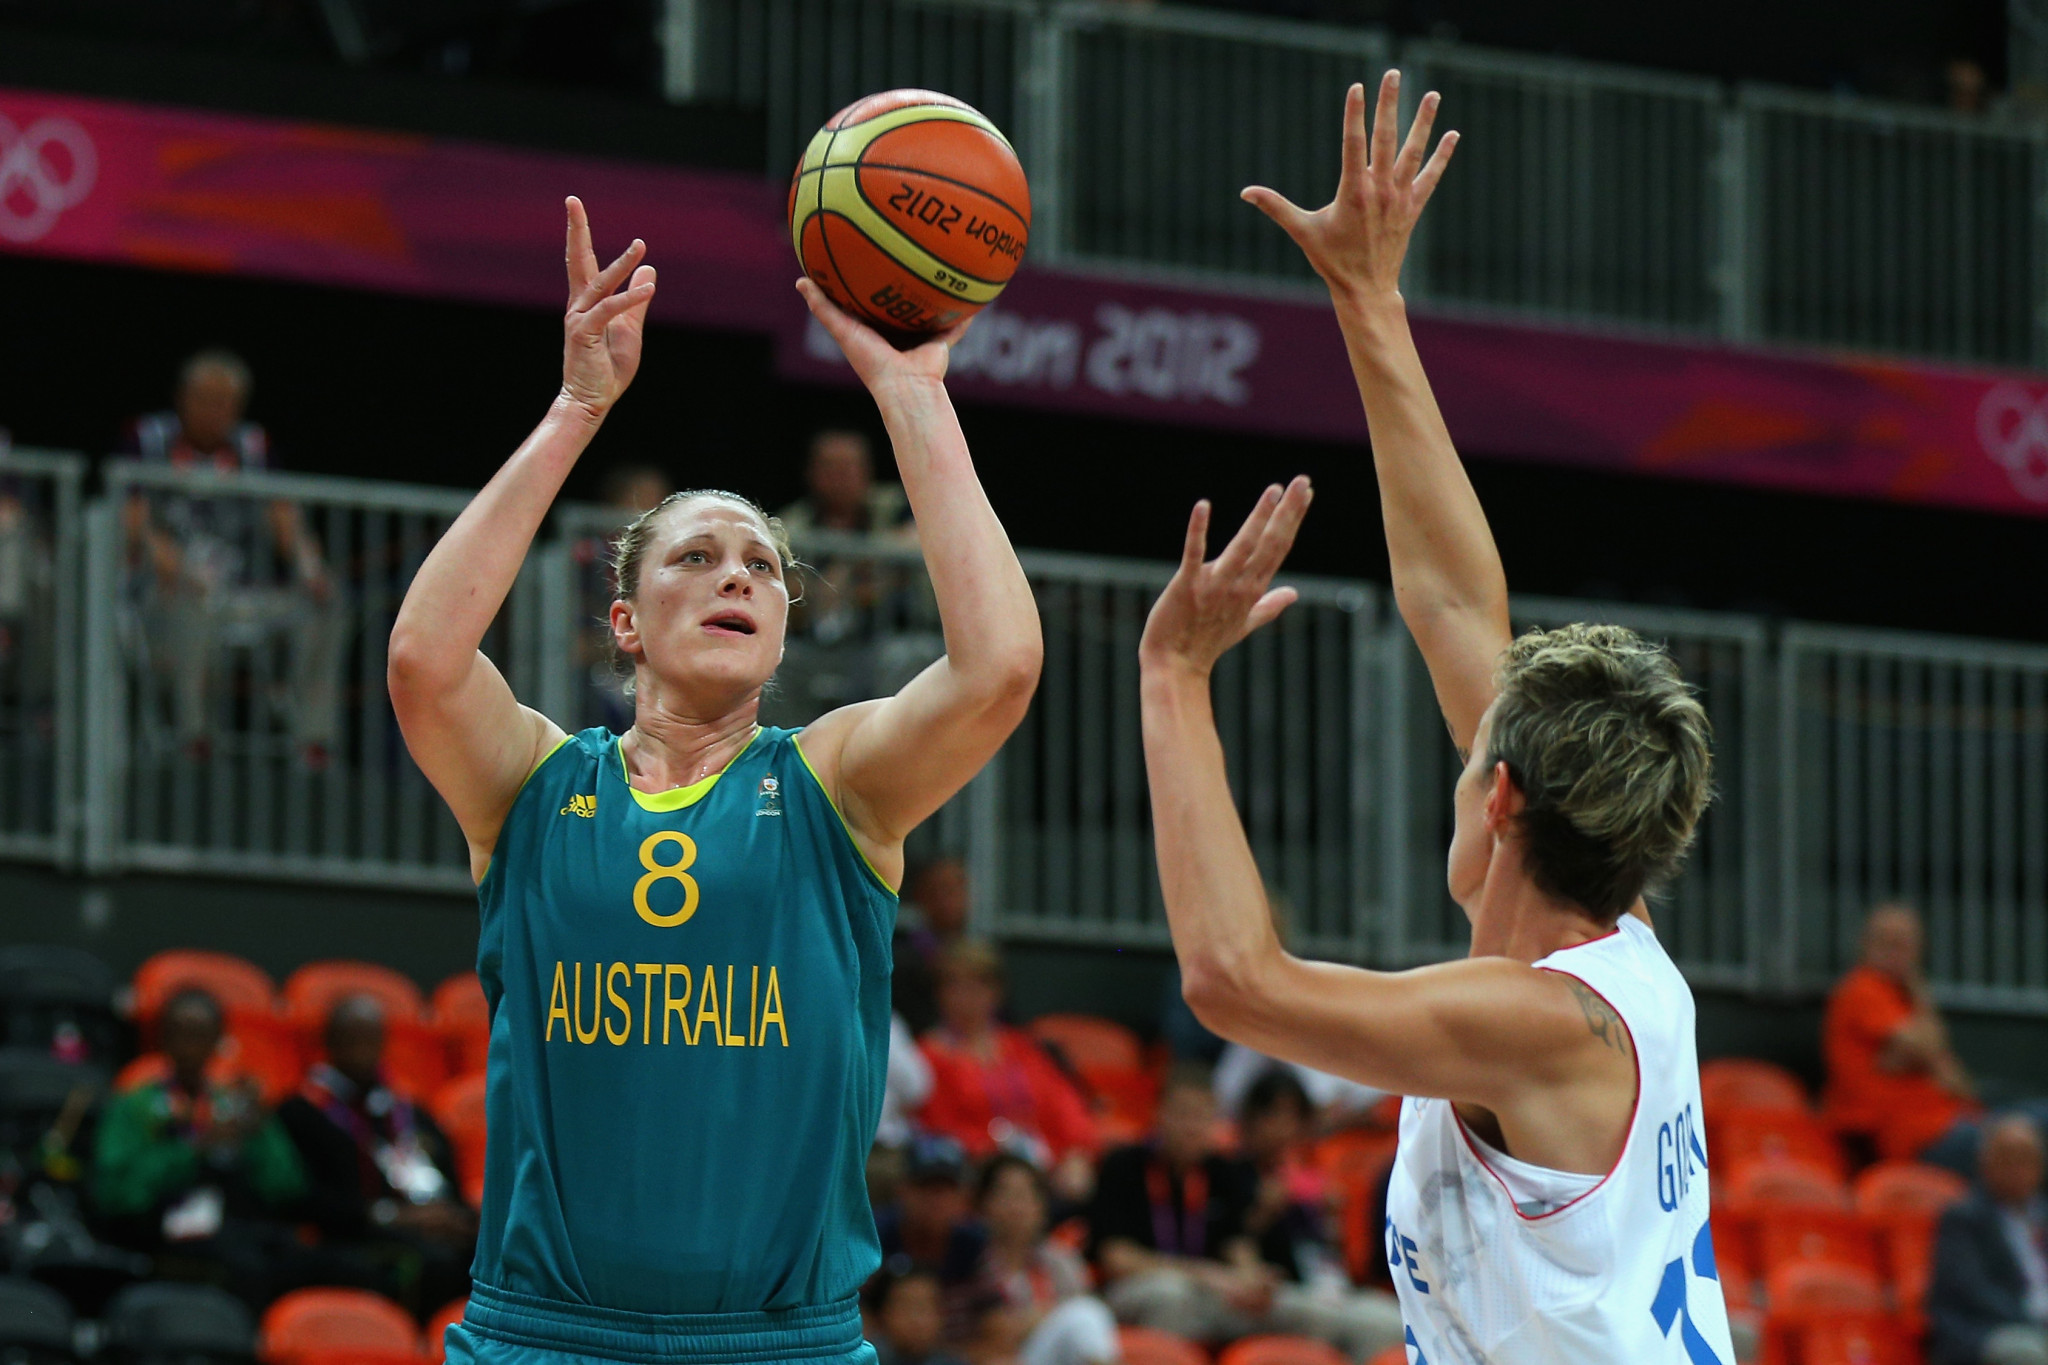 Three-time women's basketball Olympic medallist Suzy Batkovic, left, was on the Basketball Australia panel that decided Lexi Rodgers' case ©Getty Images